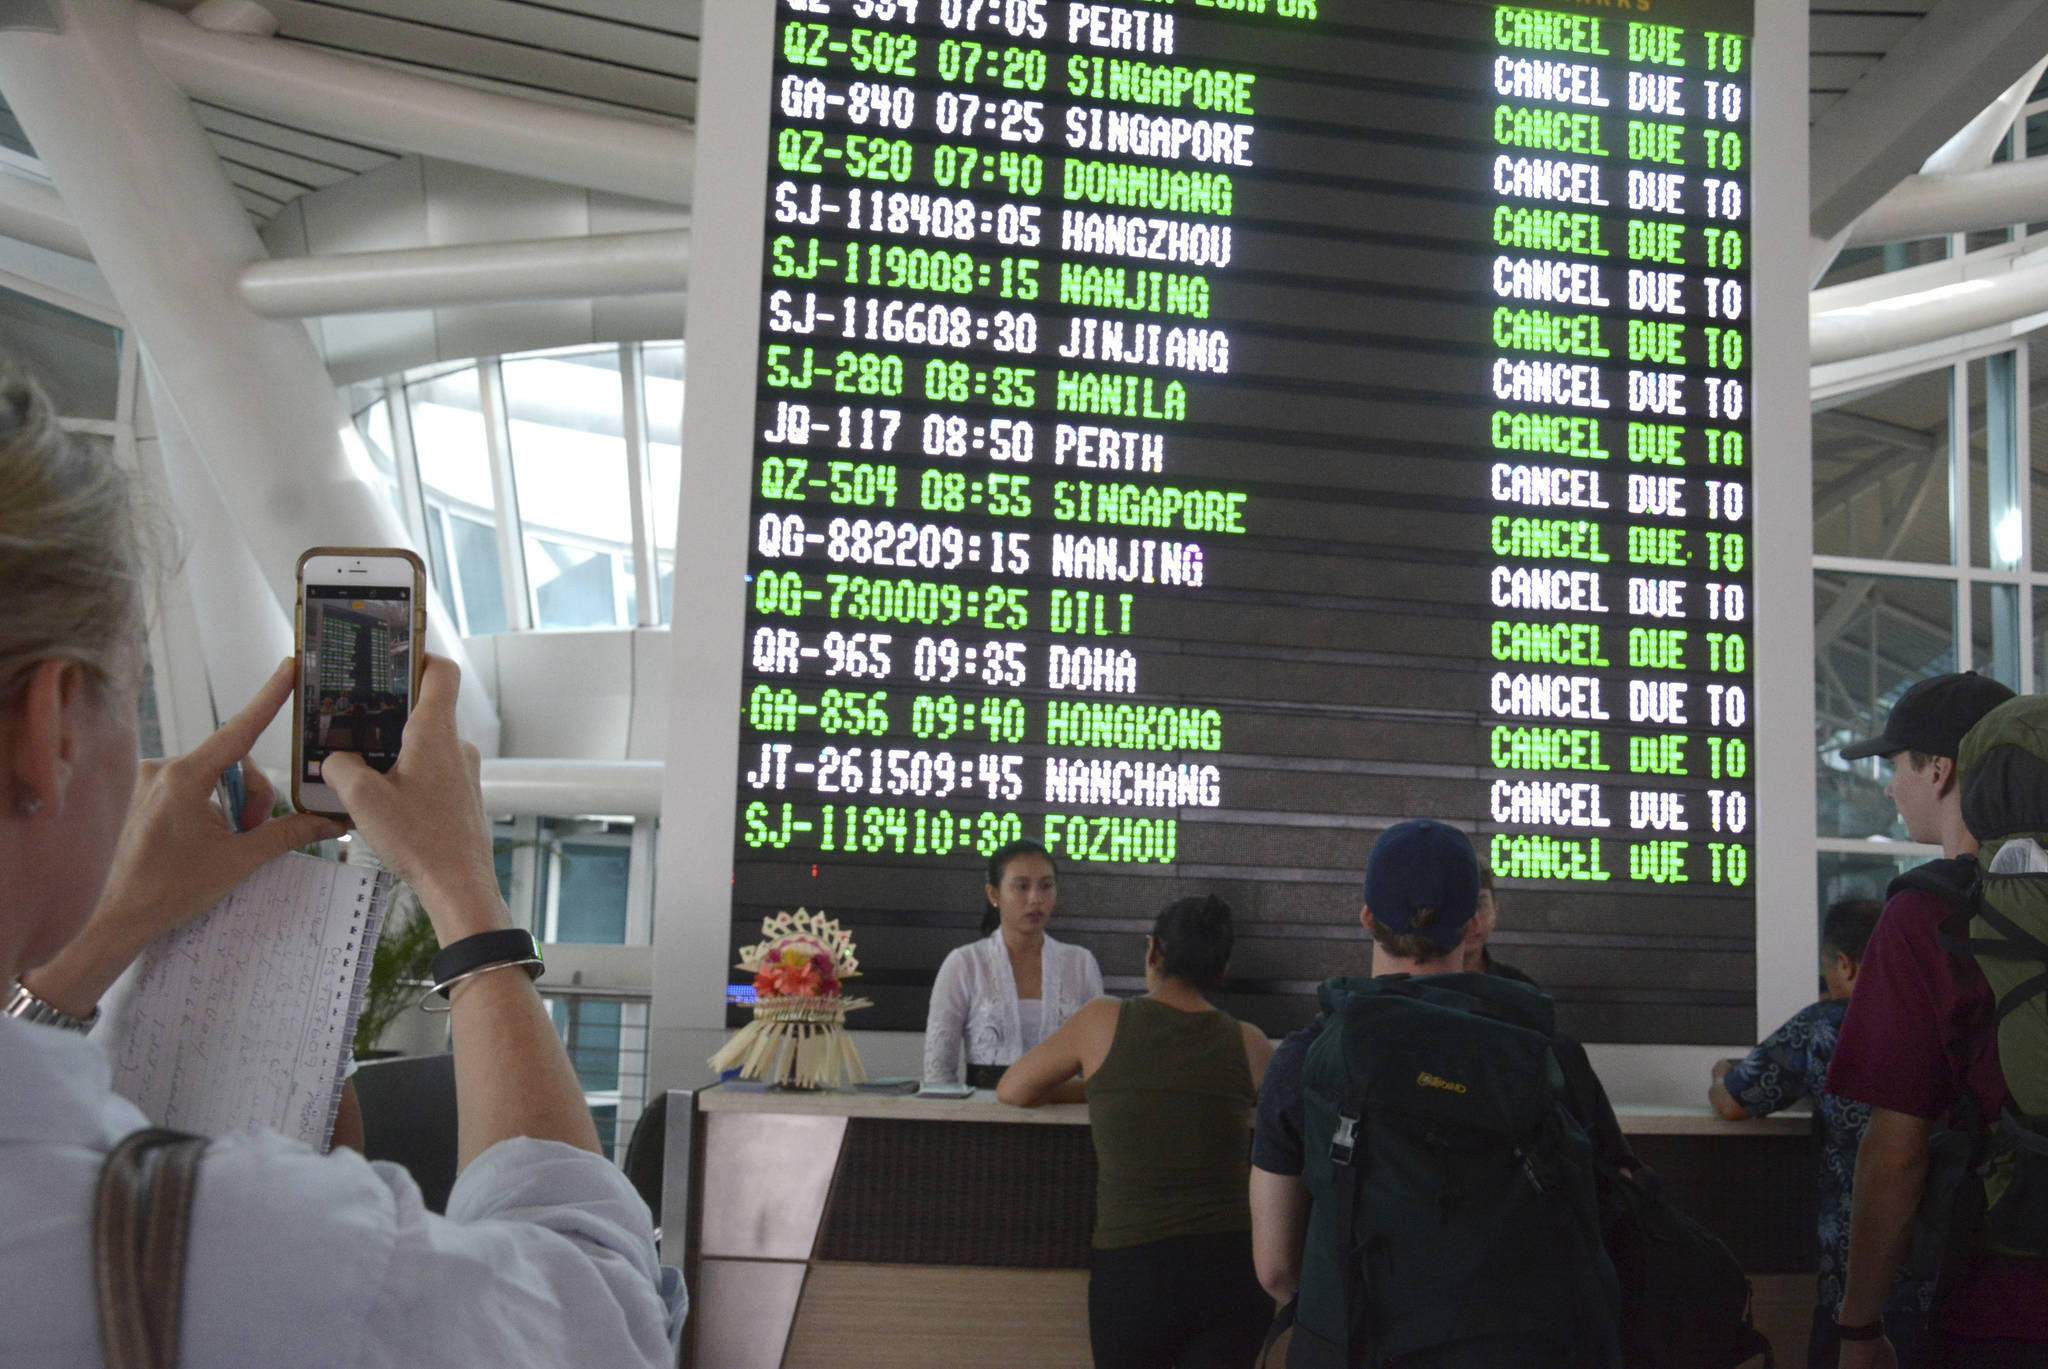 A flight information board shows cancelled flights at Ngurah Rai International Airport in Bali, Indonesia, Tuesday, Nov. 28, 2017. Indonesia’s disaster mitigation agency says the airport on the tourist island of Bali is closed for a second day due to the threat from volcanic ash. (AP Photo/Ketut Nataan)